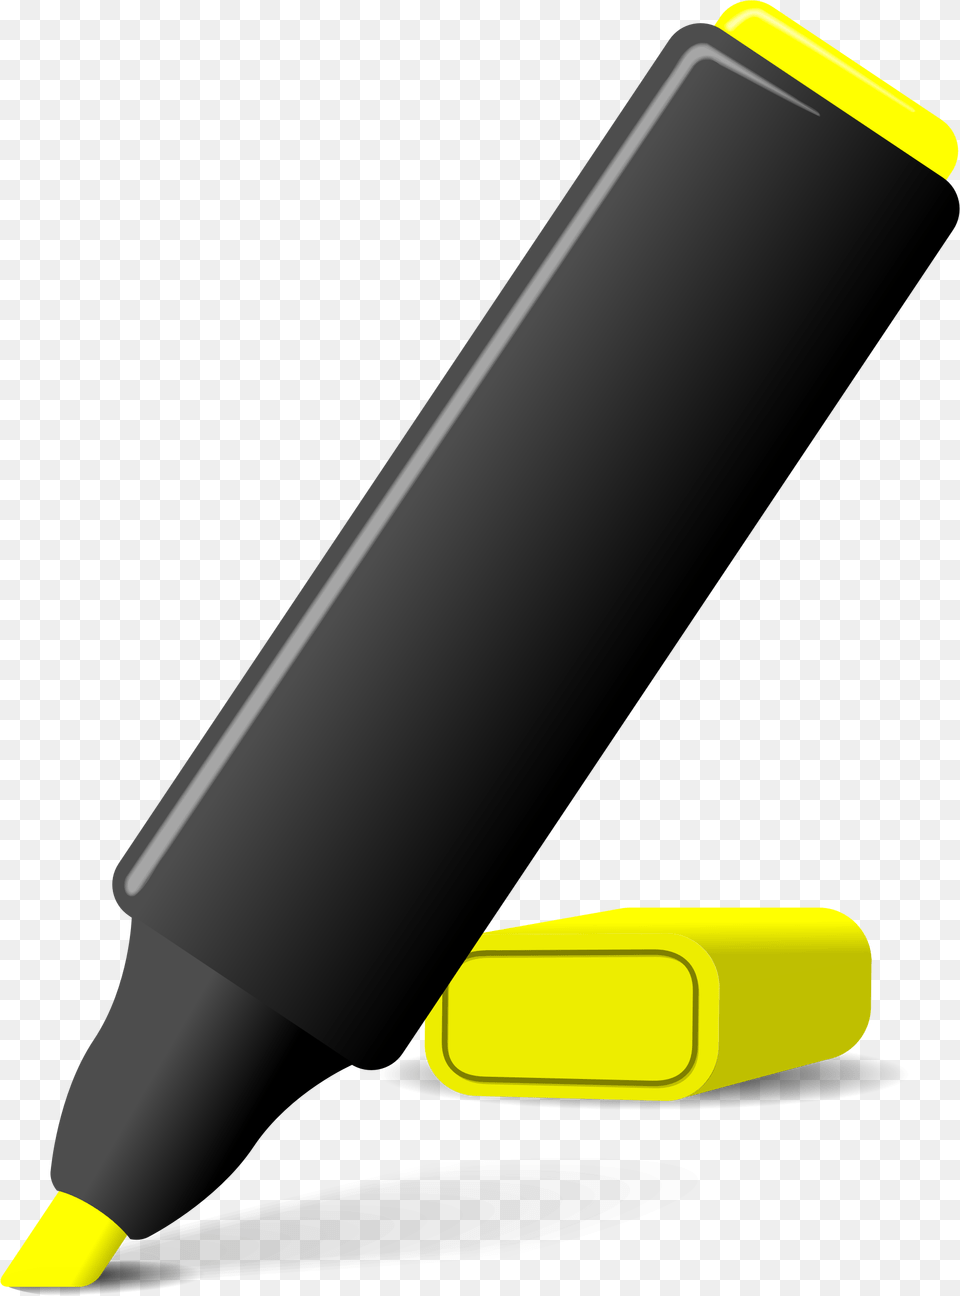 This Icons Design Of Highlighter Pen, Marker, Smoke Pipe Png Image